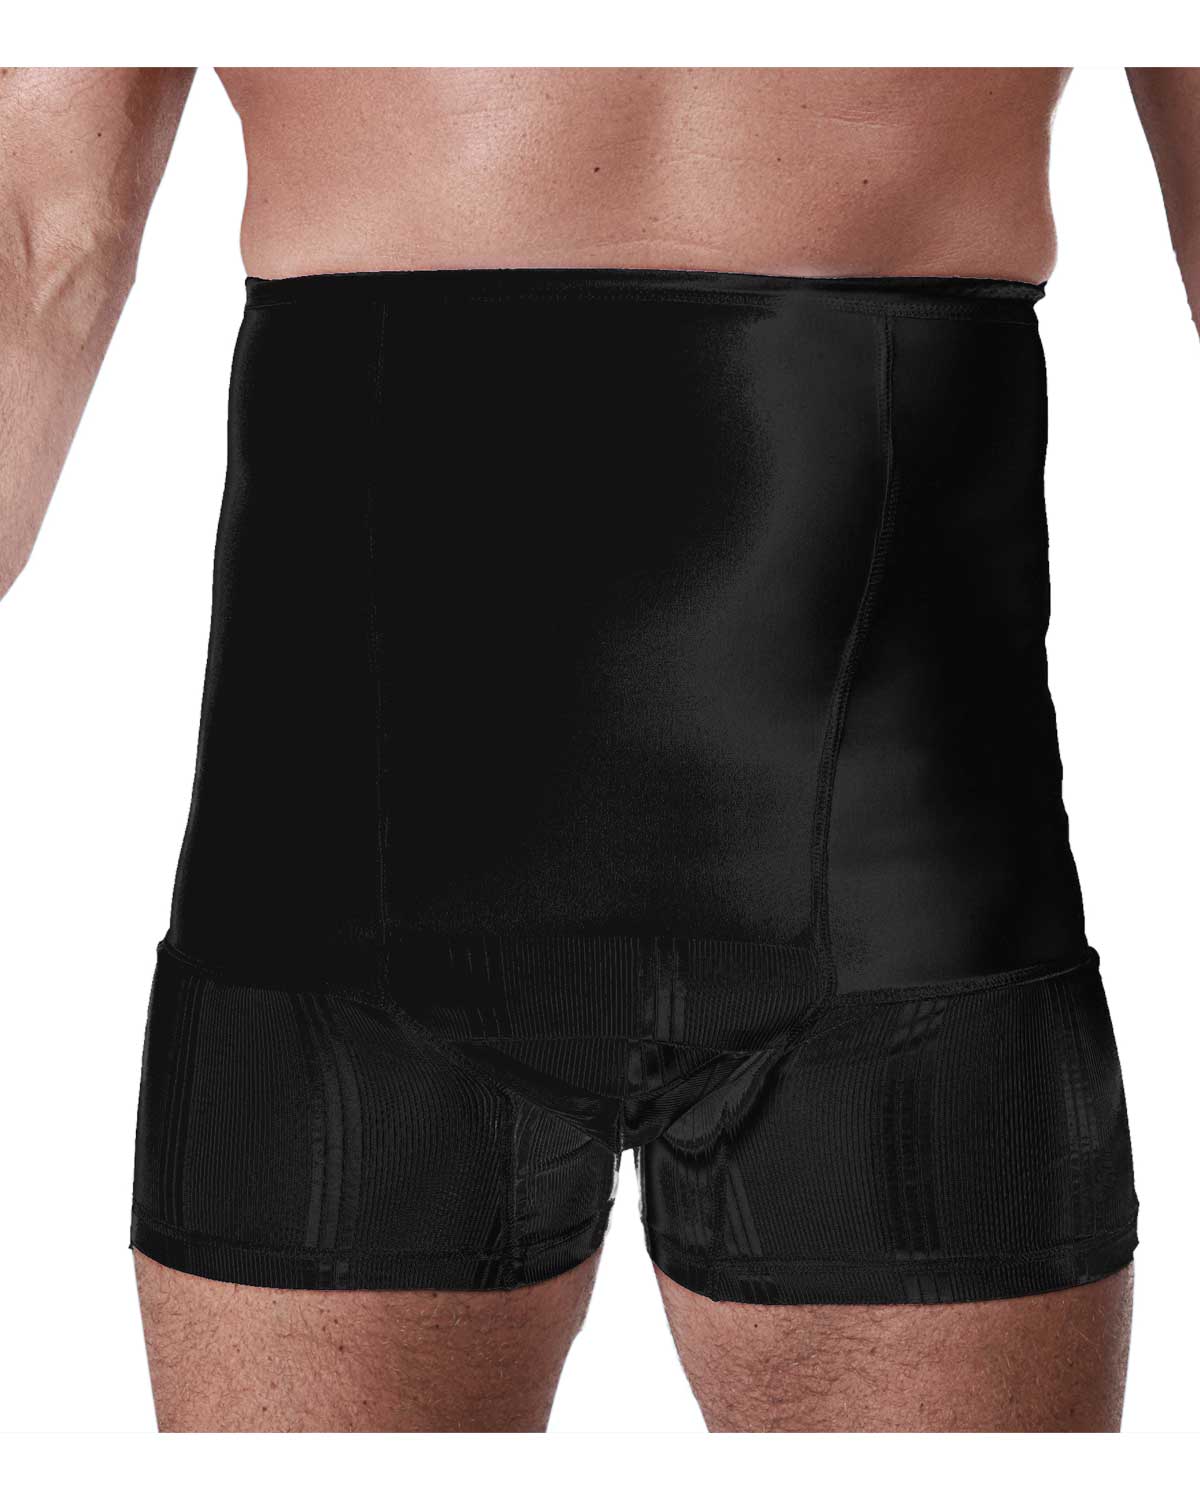 CUI Mens Hernia Low Waist Support Girdle With Legs - 1 each, XSMALL, WHITE